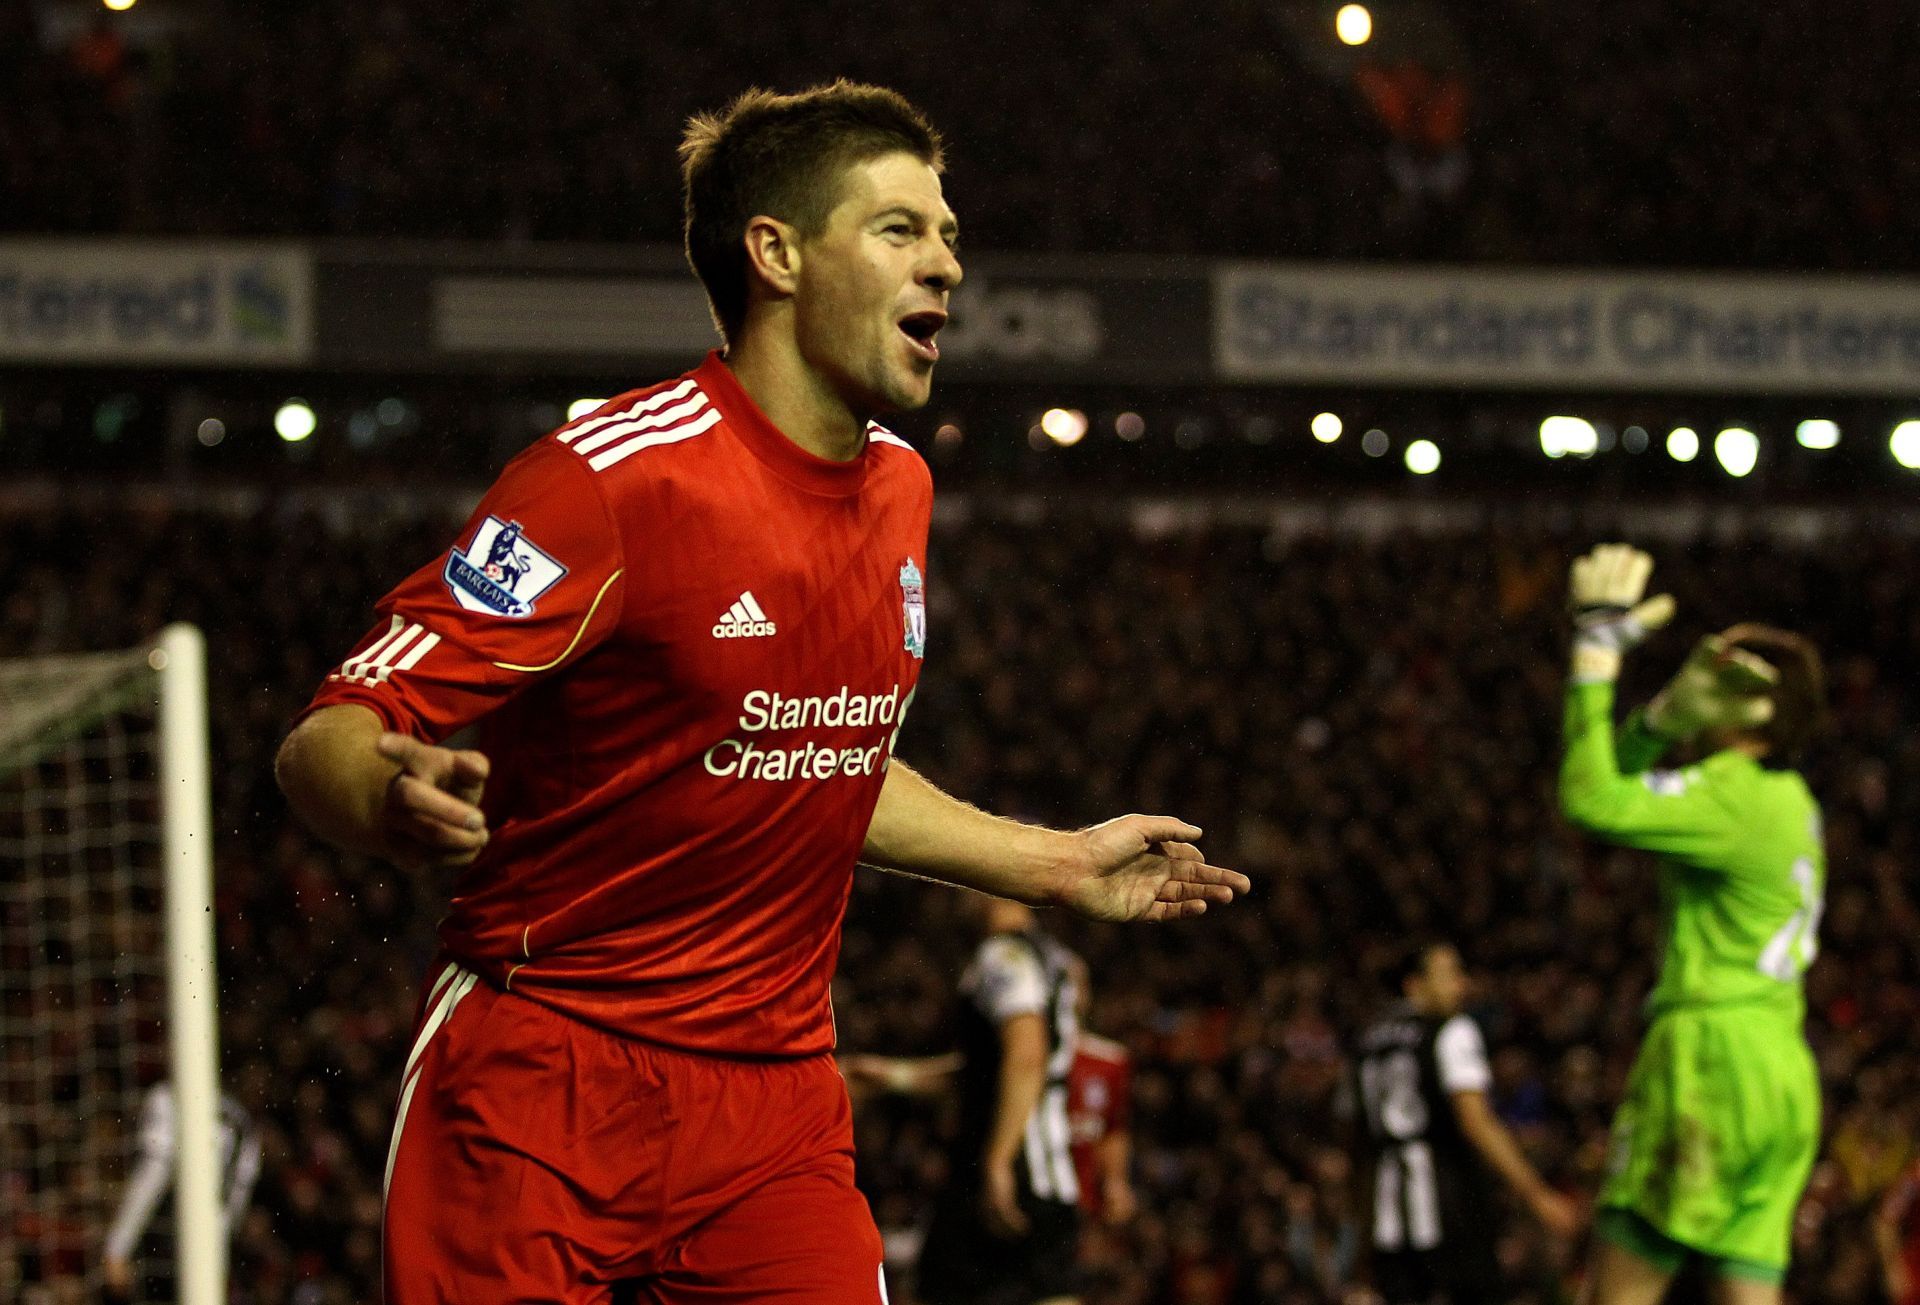 Steven Gerrard had a lot of goal contributions in the English top flight.